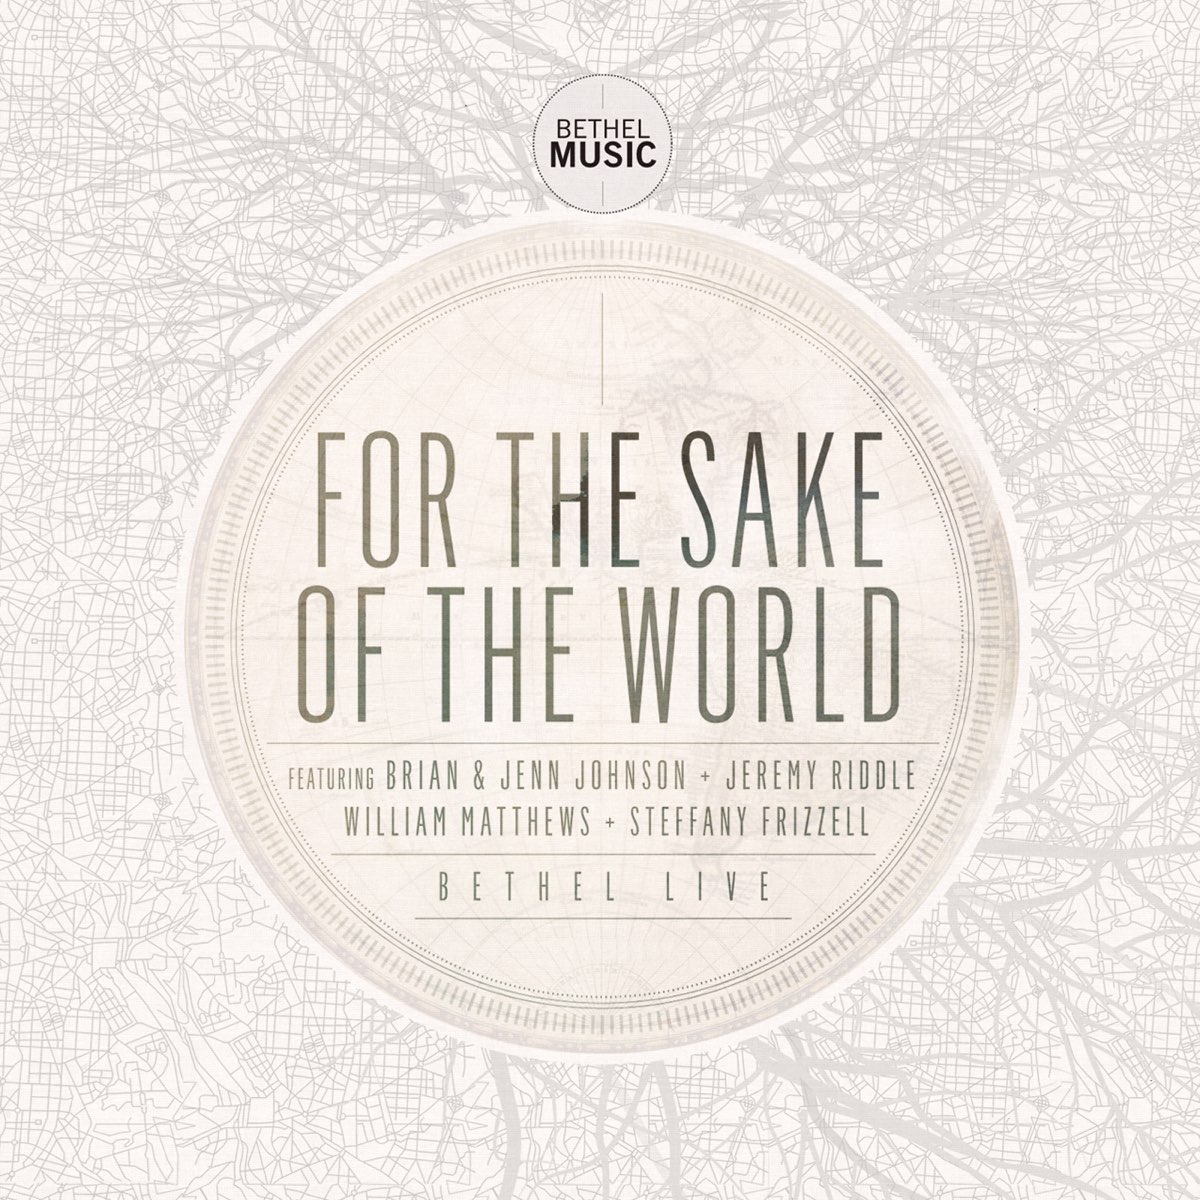 For The Sake Of The World By Bethel Music On Apple Music verse g cadd9 d our father in heaven, hallowed be your name. the sake of the world by bethel music